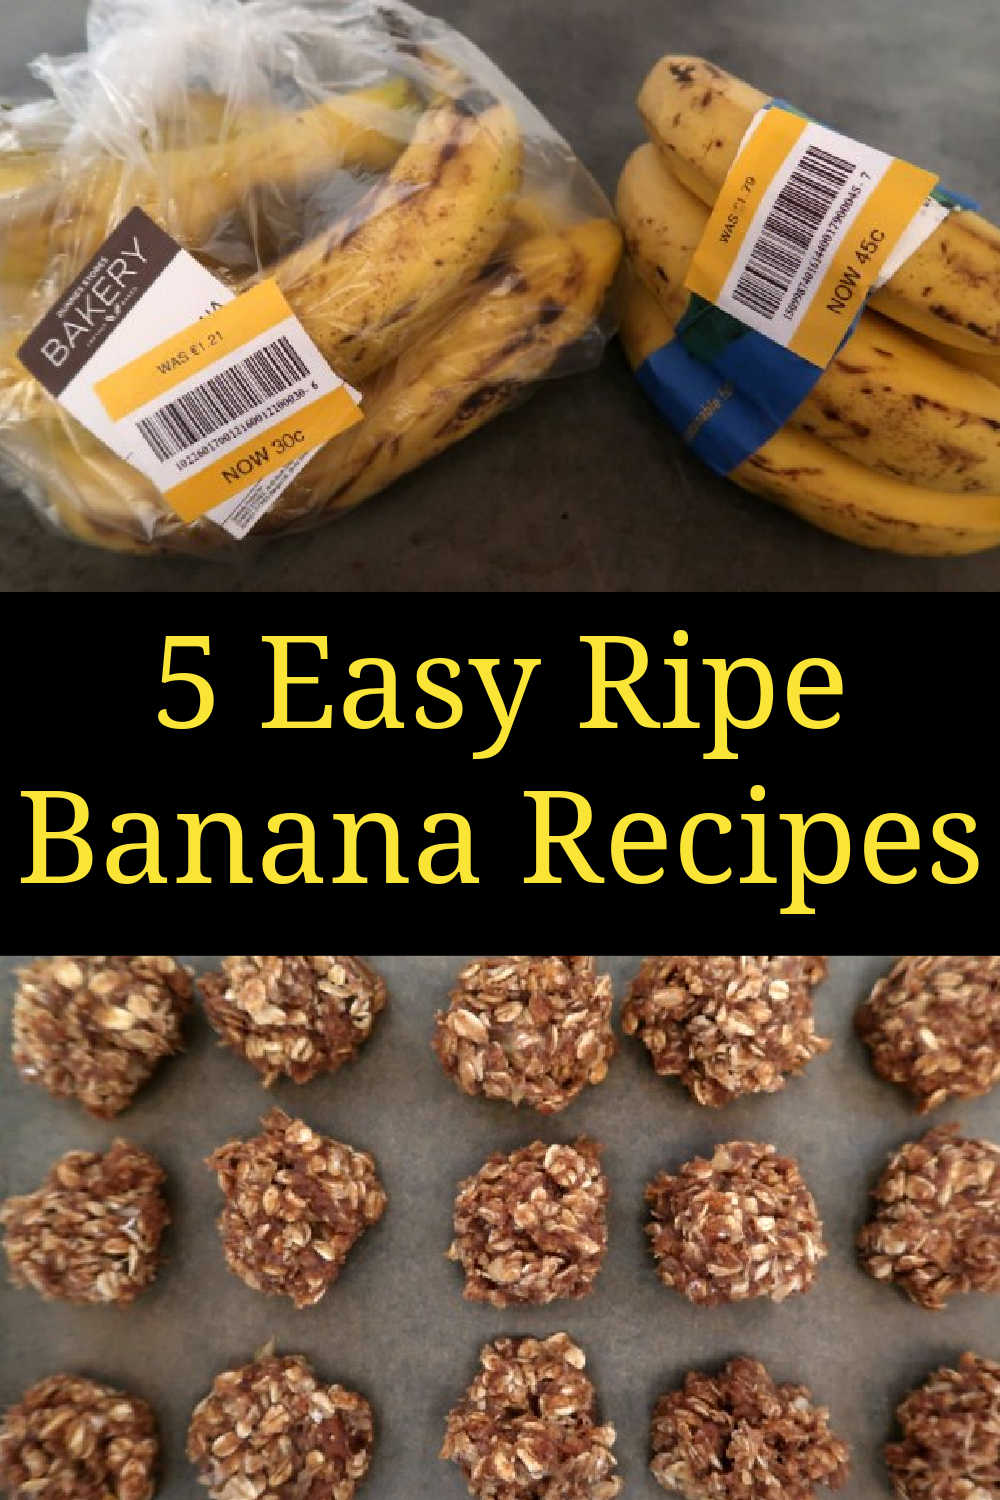 What To Do With Ripe Bananas - 5 best easy ripe banana recipes - quick ways to use up overripe bananas including no bake breakfast sweet treats, pancakes, cookies and oat ideas.